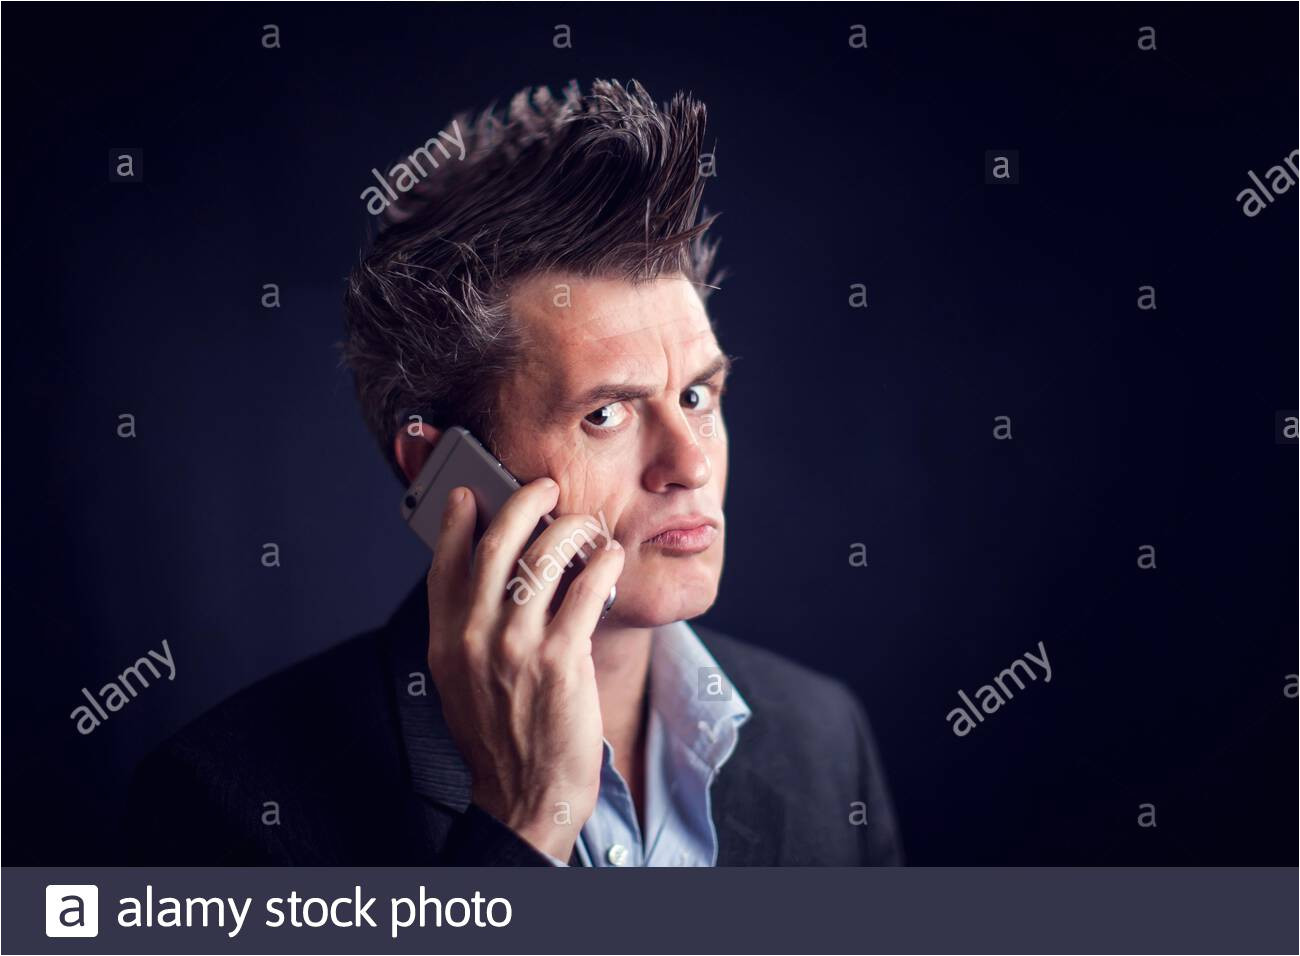 handsome man with mohawk wearing suit using mobile phone in front of black background 2agr9h9 jpg